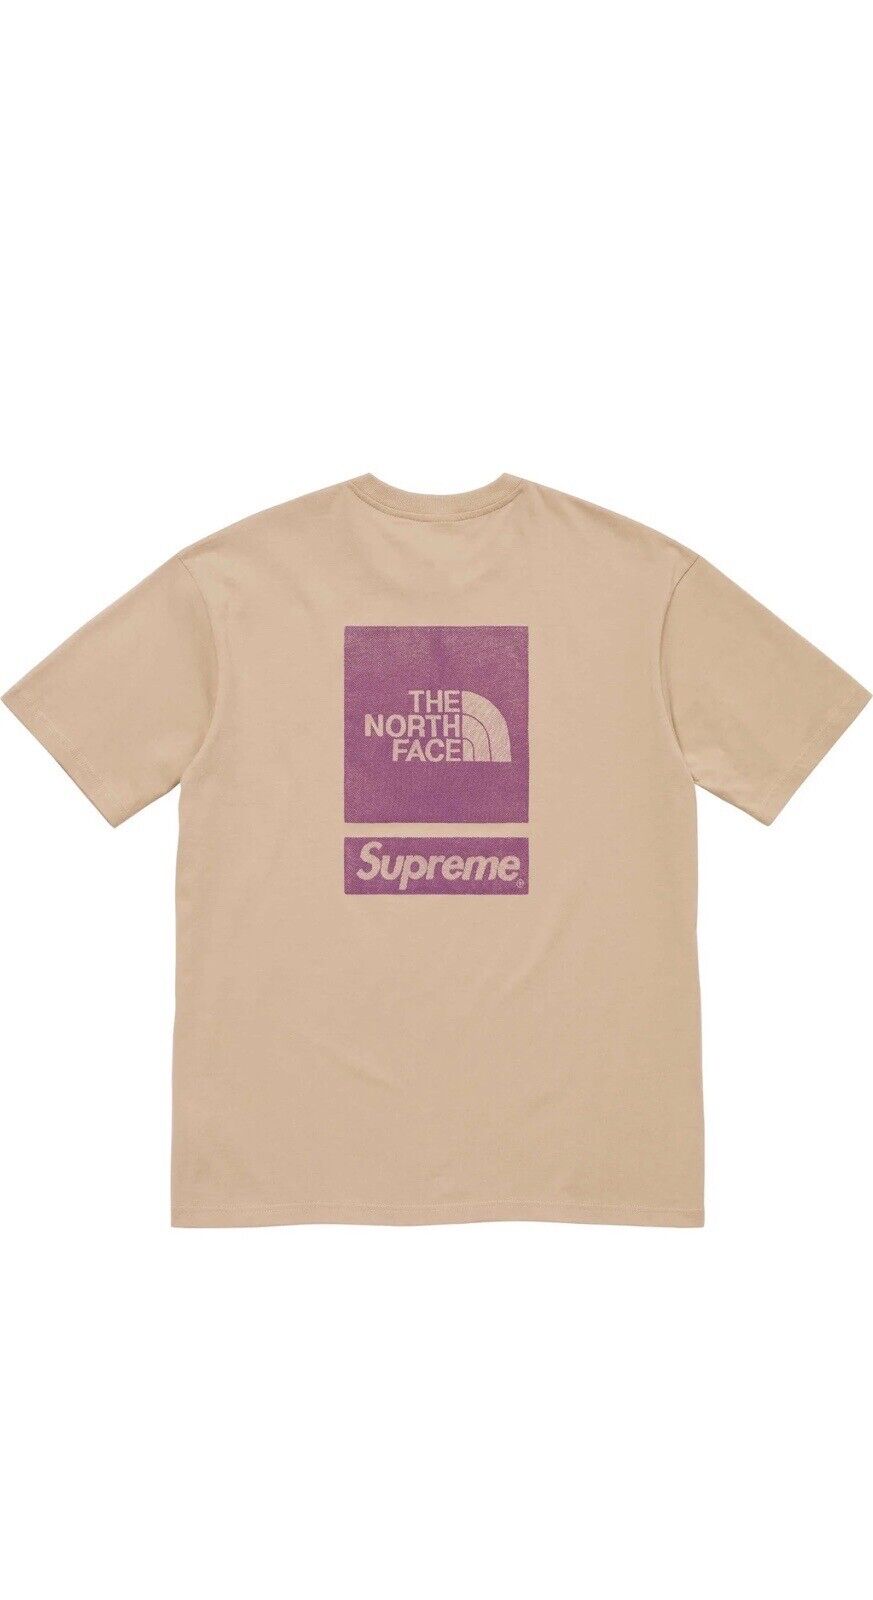 Supreme@/The North Face@ S/S Top